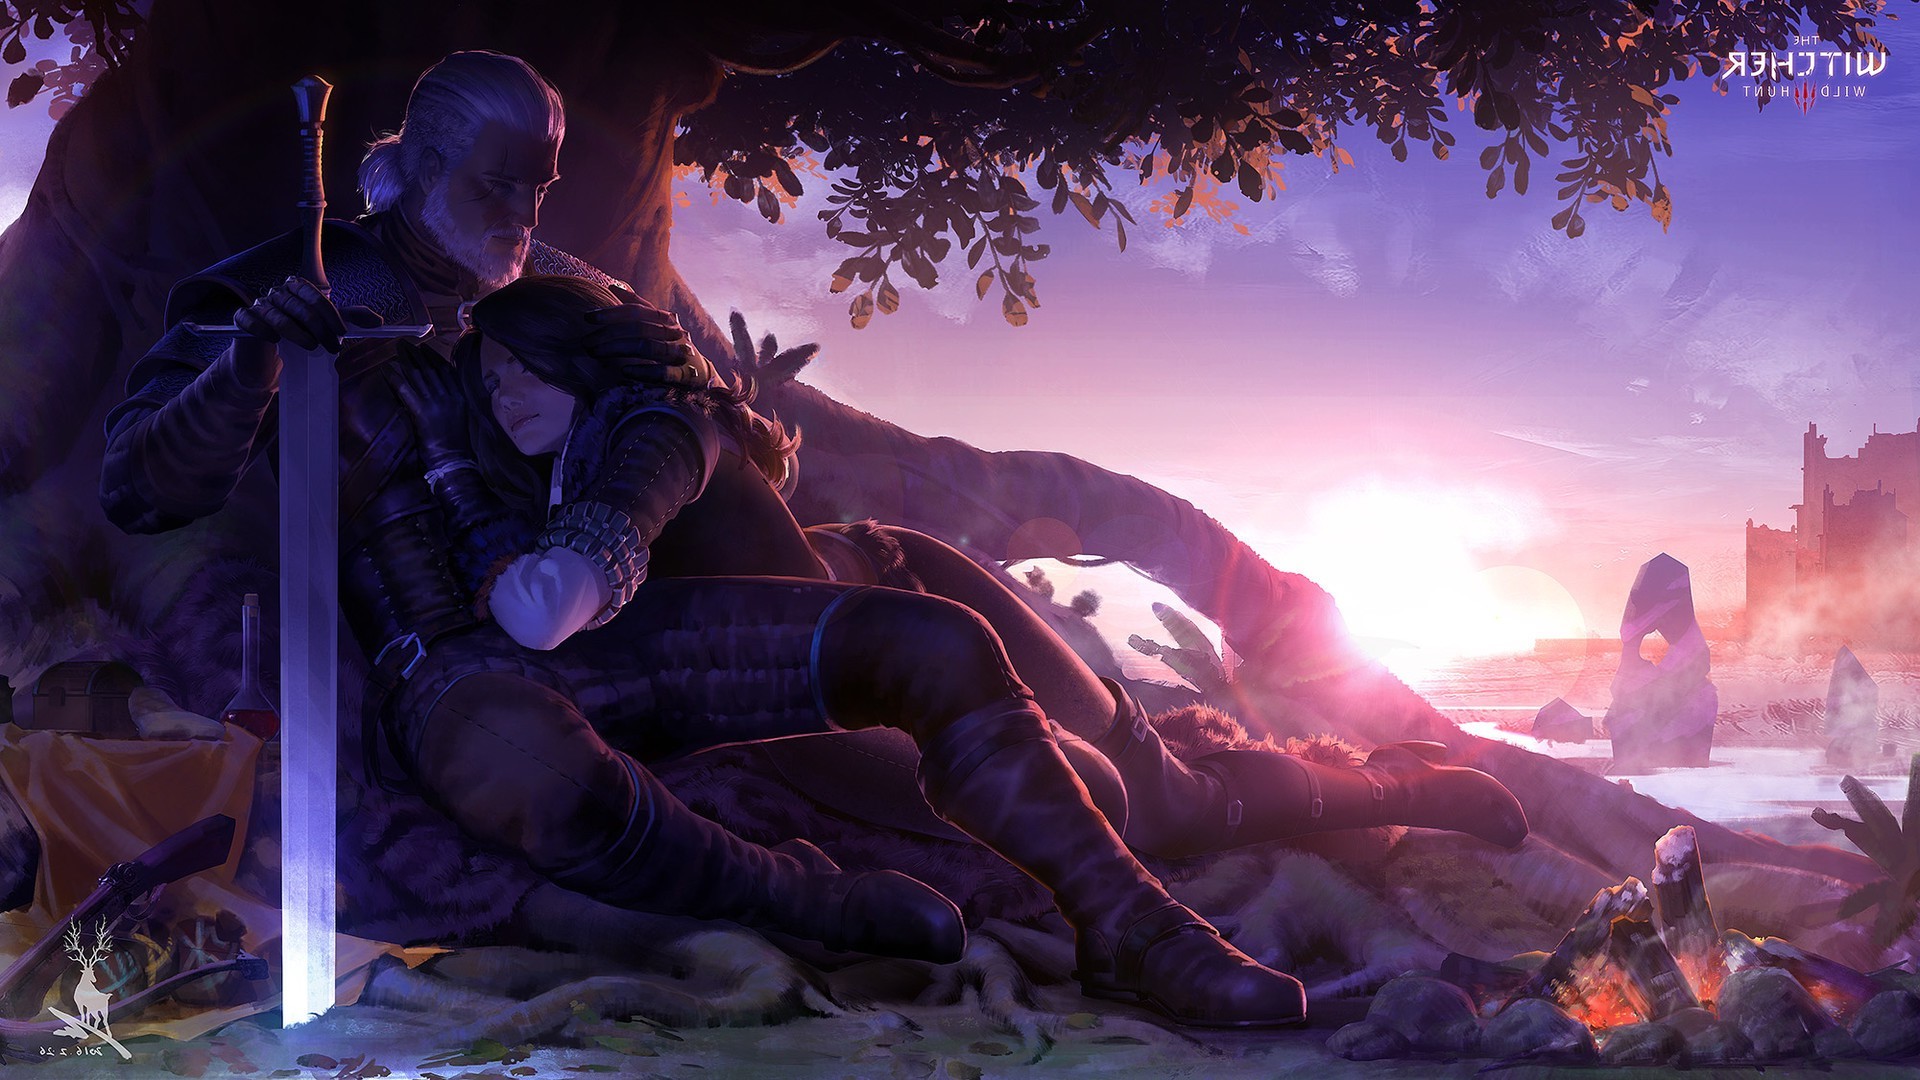 the witcher wallpaper 1920x1080,action adventure game,cg artwork,fictional character,illustration,fiction